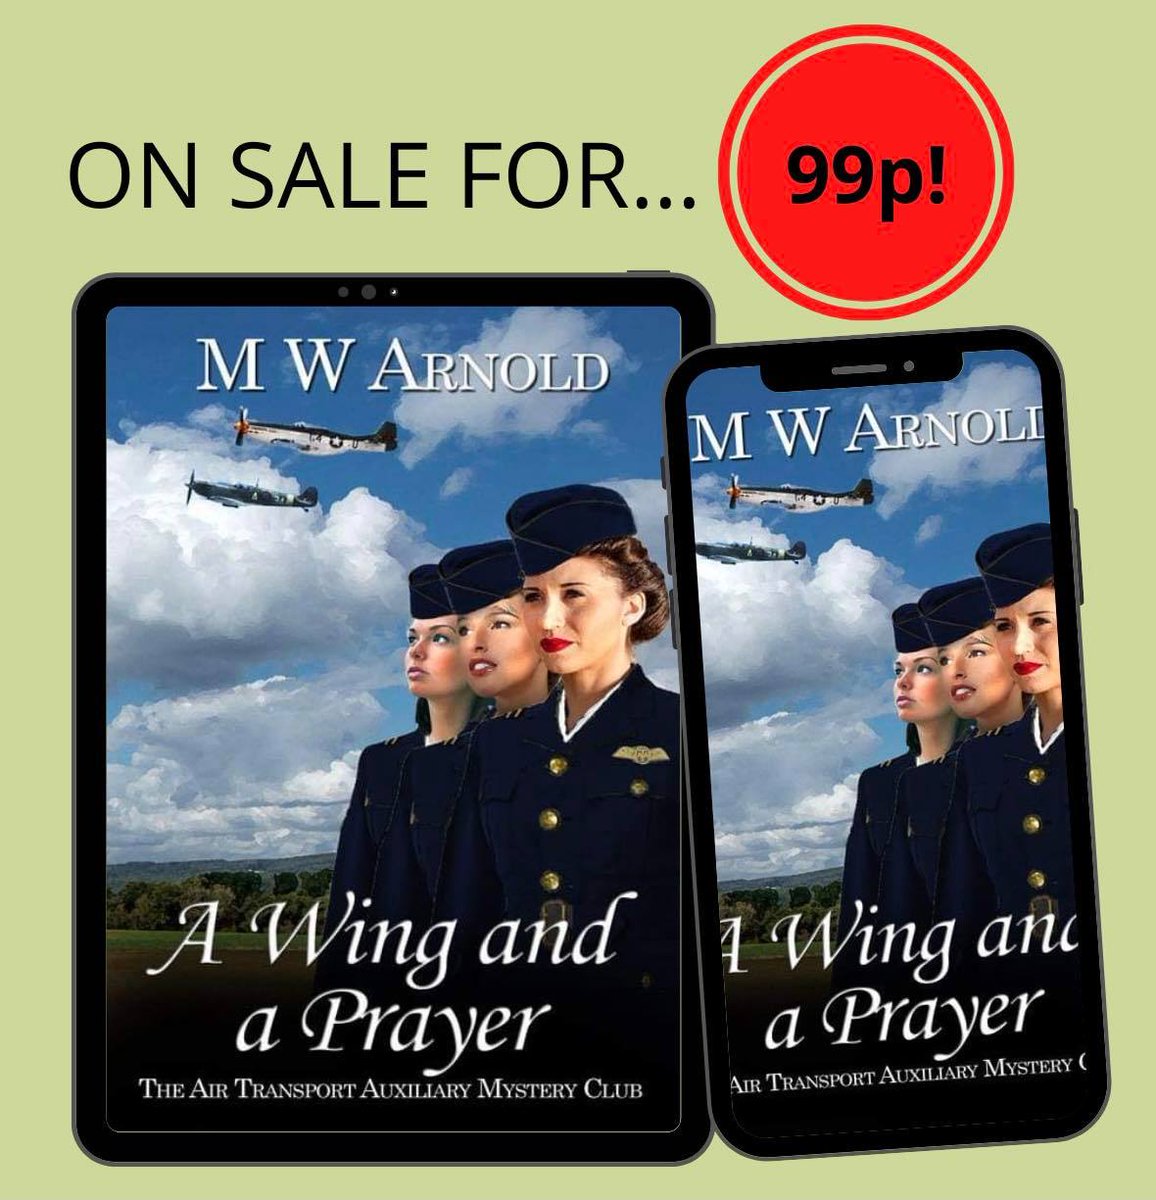 Now over 900 @AmazonUK ratings! 'A Wing and a Prayer' still only #99p on Kindle Deal! mybook.to/AWingAndAPrayer @RNAtweets #Tuesnews @WildRosePress #Historical #saga #mystery #Romance #Thrillers #histfic #ebook